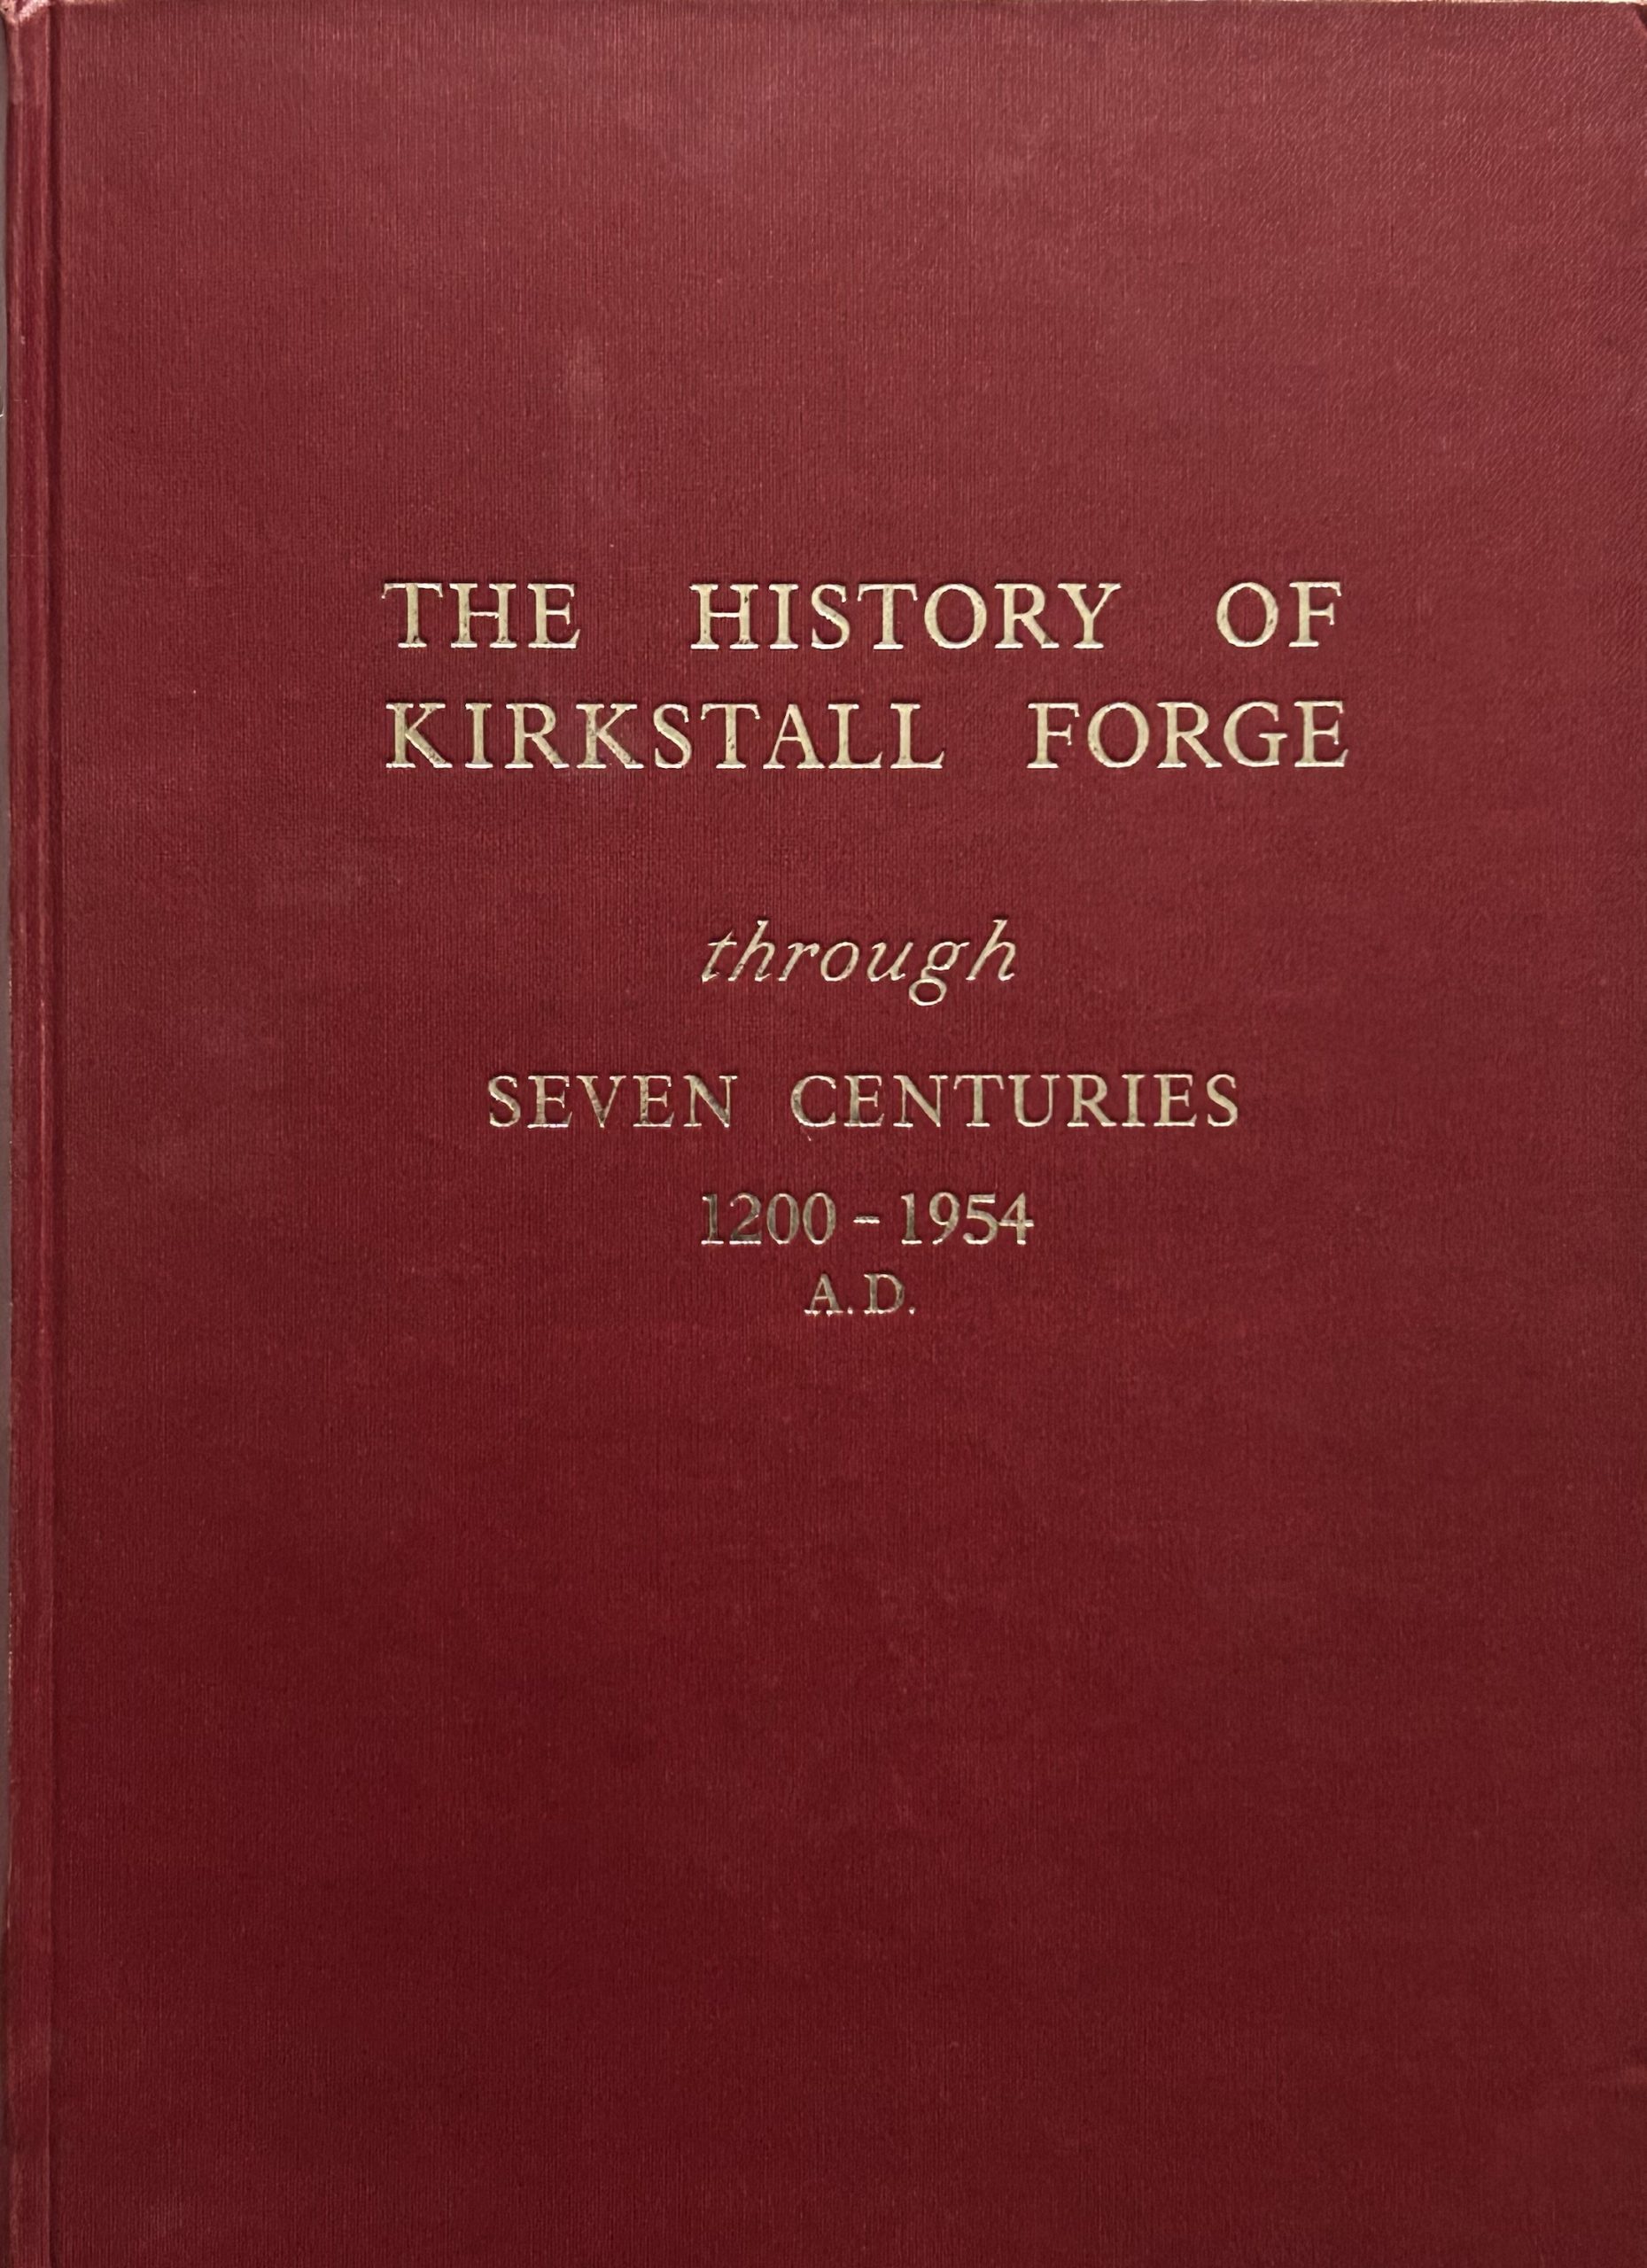 The History of Kirkstall Forge Through Seven Centuries 1200-1954 A.D.